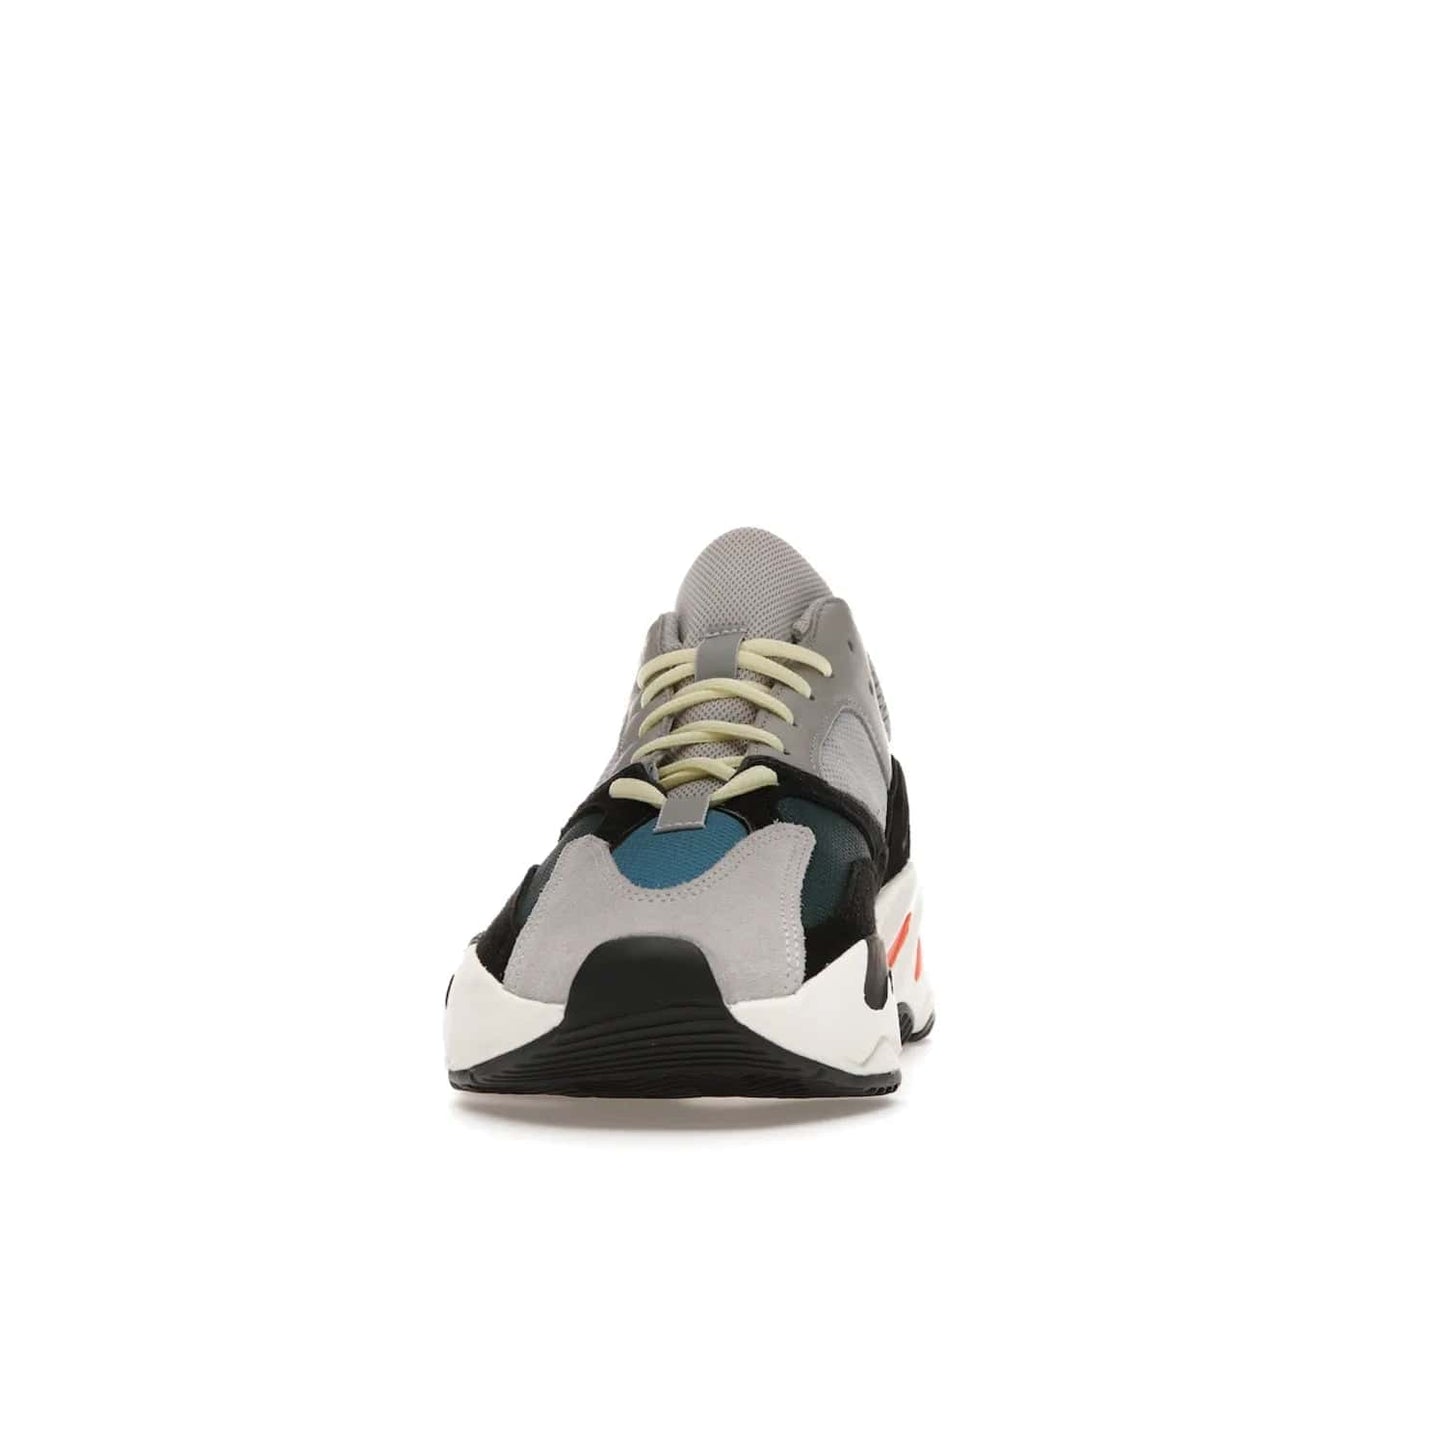 adidas Yeezy Boost 700 Wave Runner - Image 11 - Only at www.BallersClubKickz.com - Shop the iconic adidas Yeezy Boost 700 Wave Runner. Featuring grey mesh and leather upper, black suede overlays, teal mesh underlays, and signature Boost sole. Be bold & make a statement.